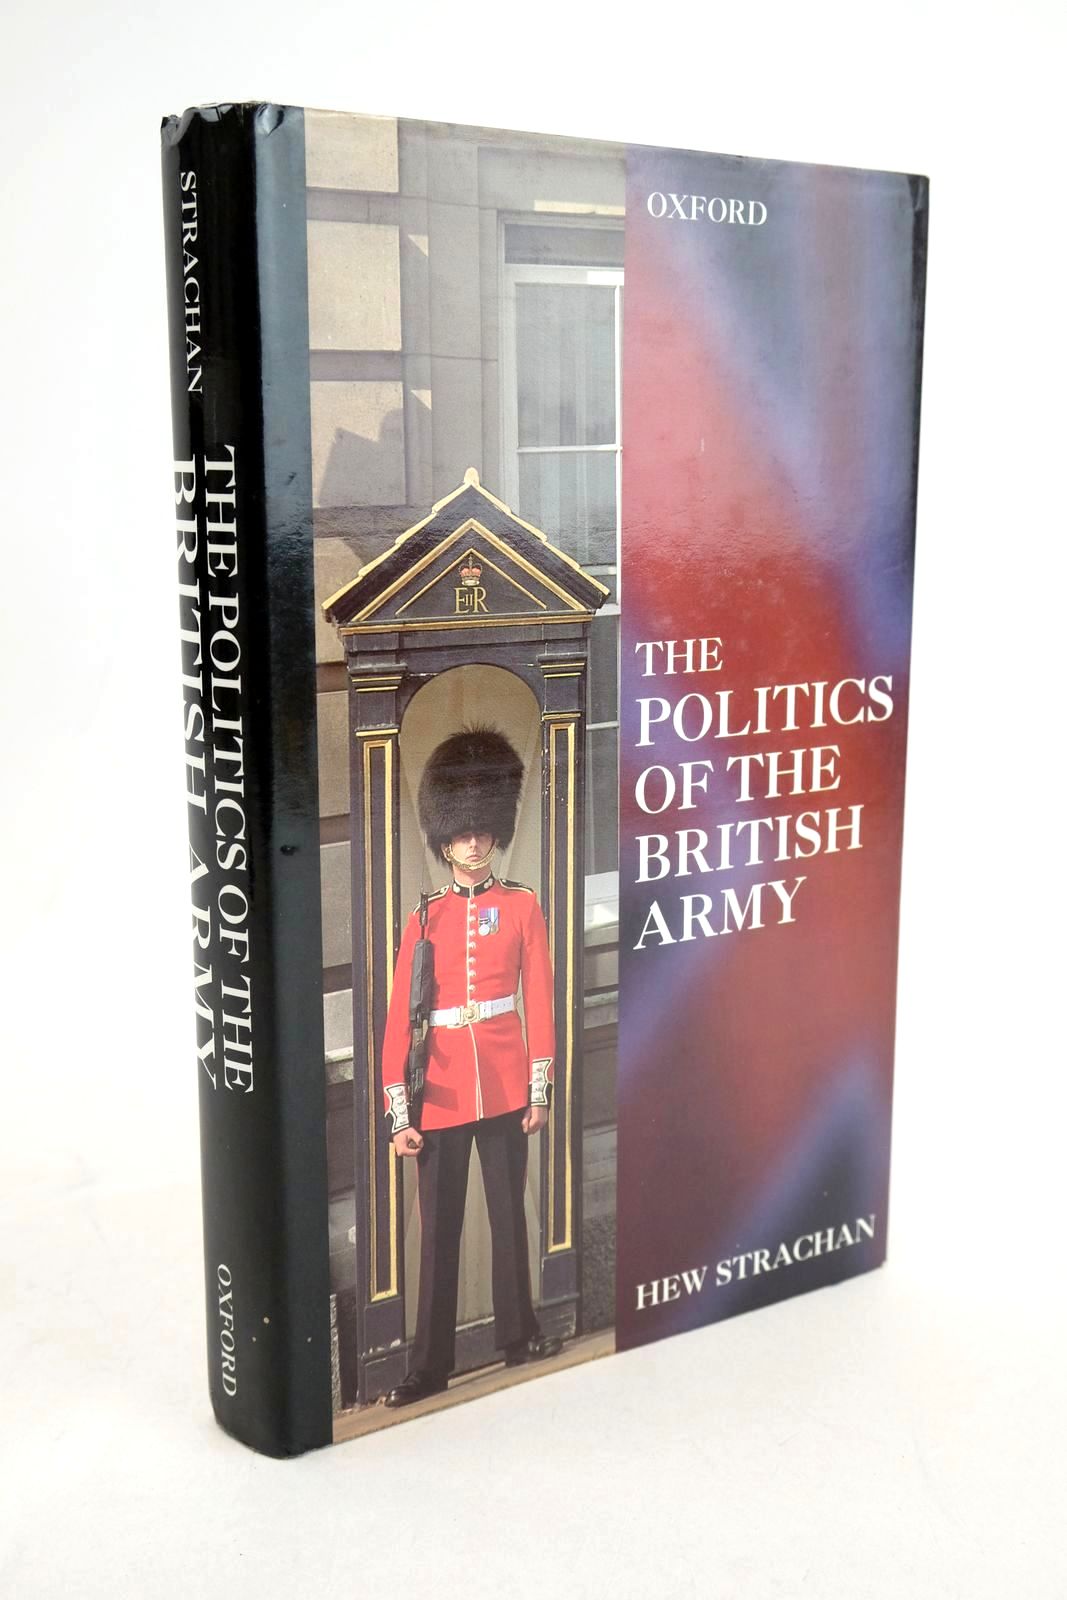 Photo of THE POLITICS OF THE BRITISH ARMY written by Strachan, Hew published by Oxford University Press, The Clarendon Press (STOCK CODE: 1327421)  for sale by Stella & Rose's Books